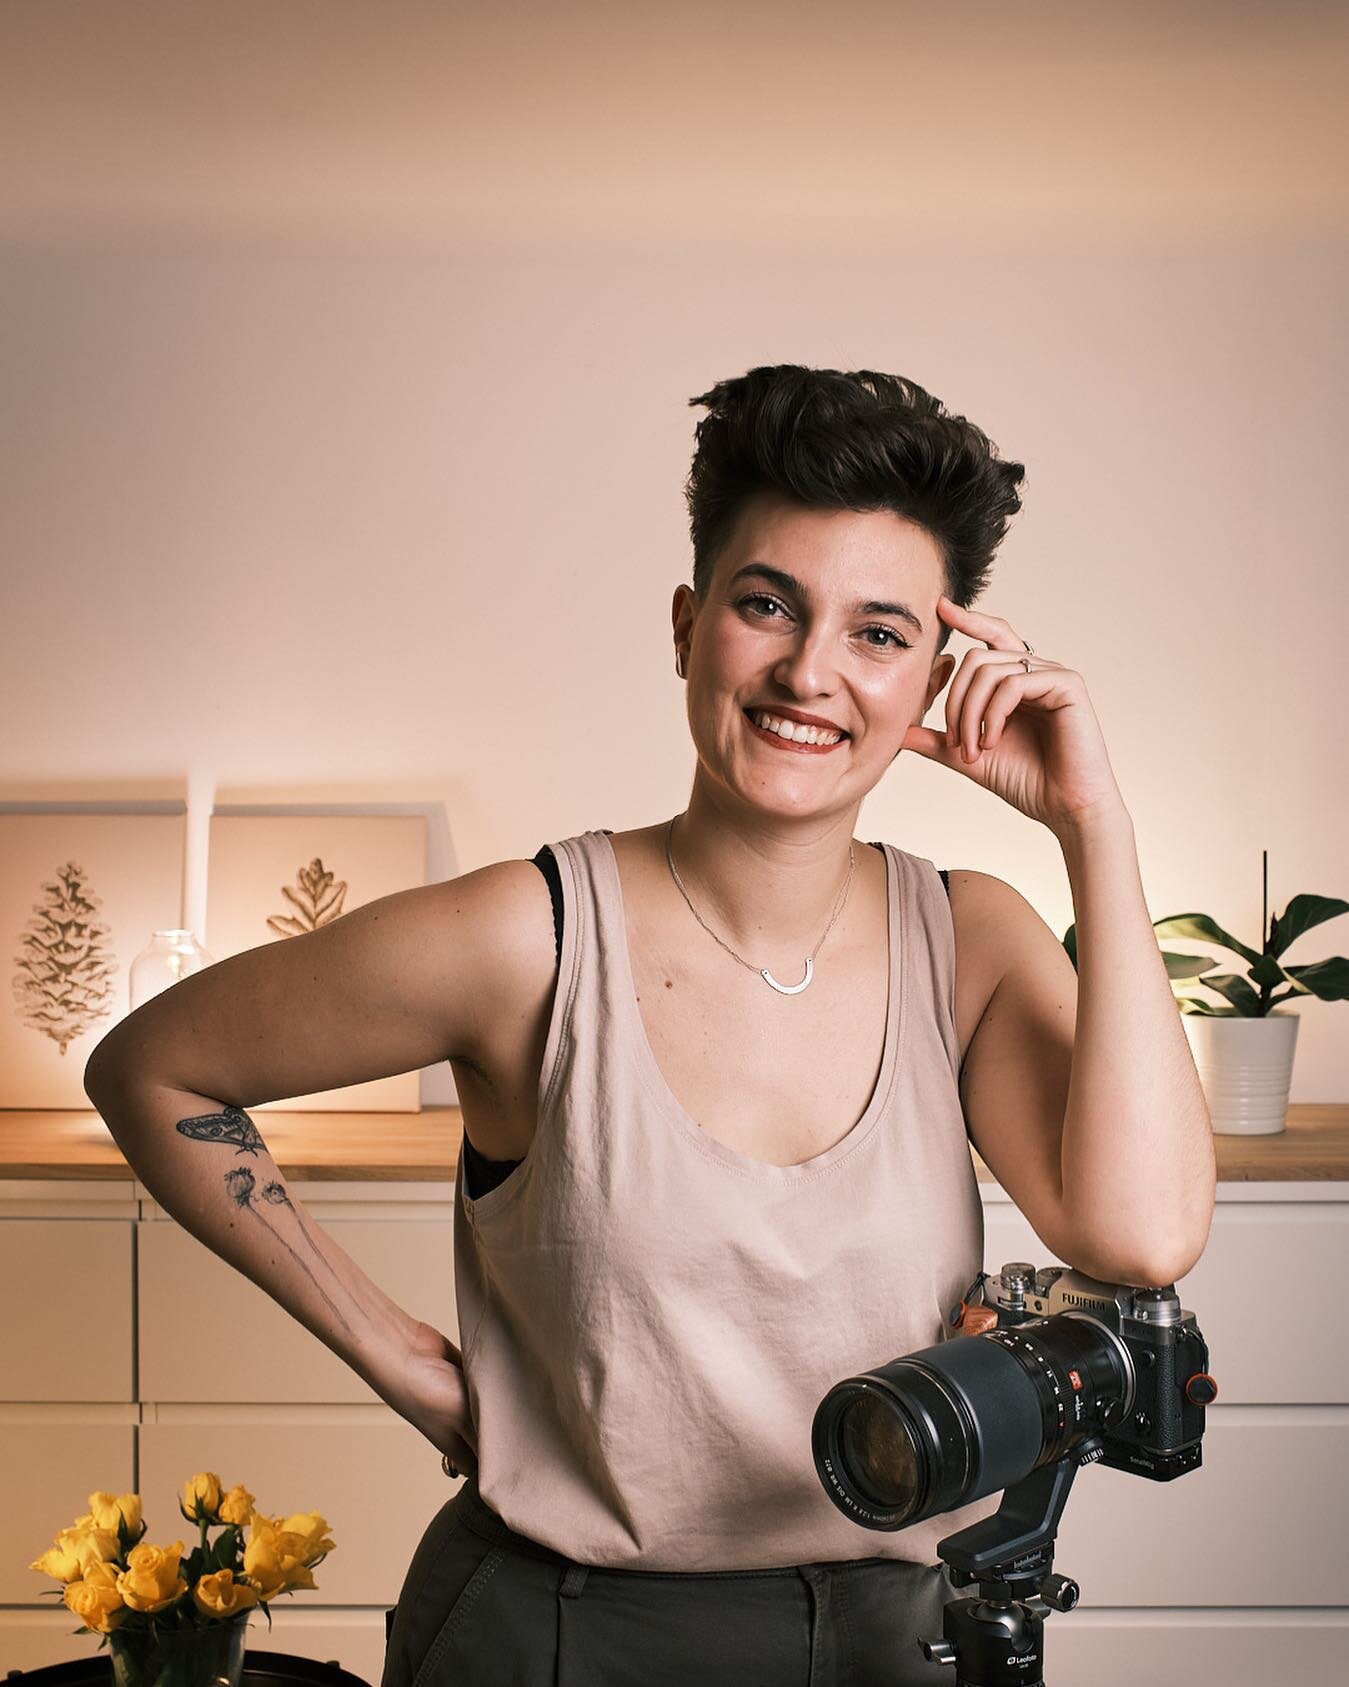 Hej! 

My name is Paloma, and I am a certified birth photographer. I recently moved to Sweden with my wife and our dogs, and we have found our home in Uppsala. Living here had been a dream of us for so long, and we couldn't be happier that we made it